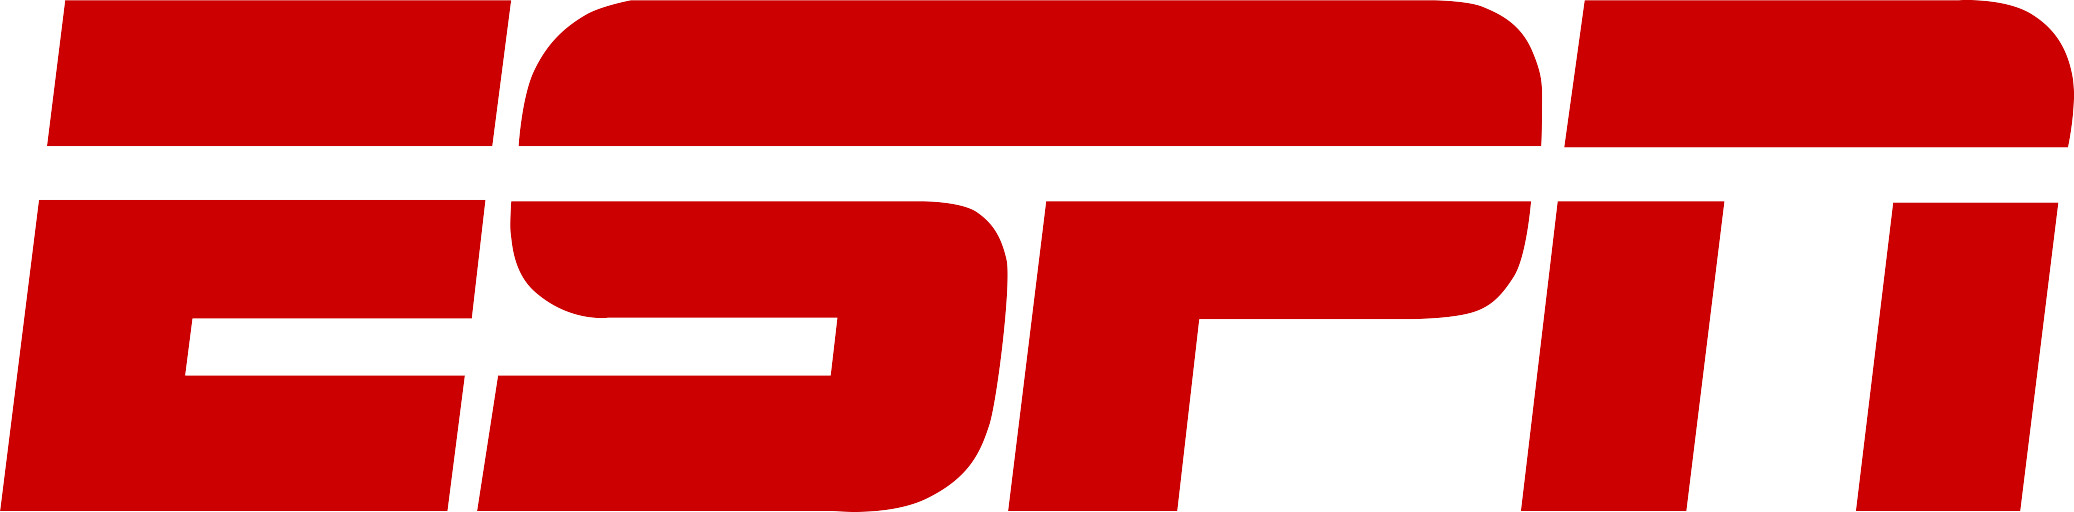 college of arts and science espn logo